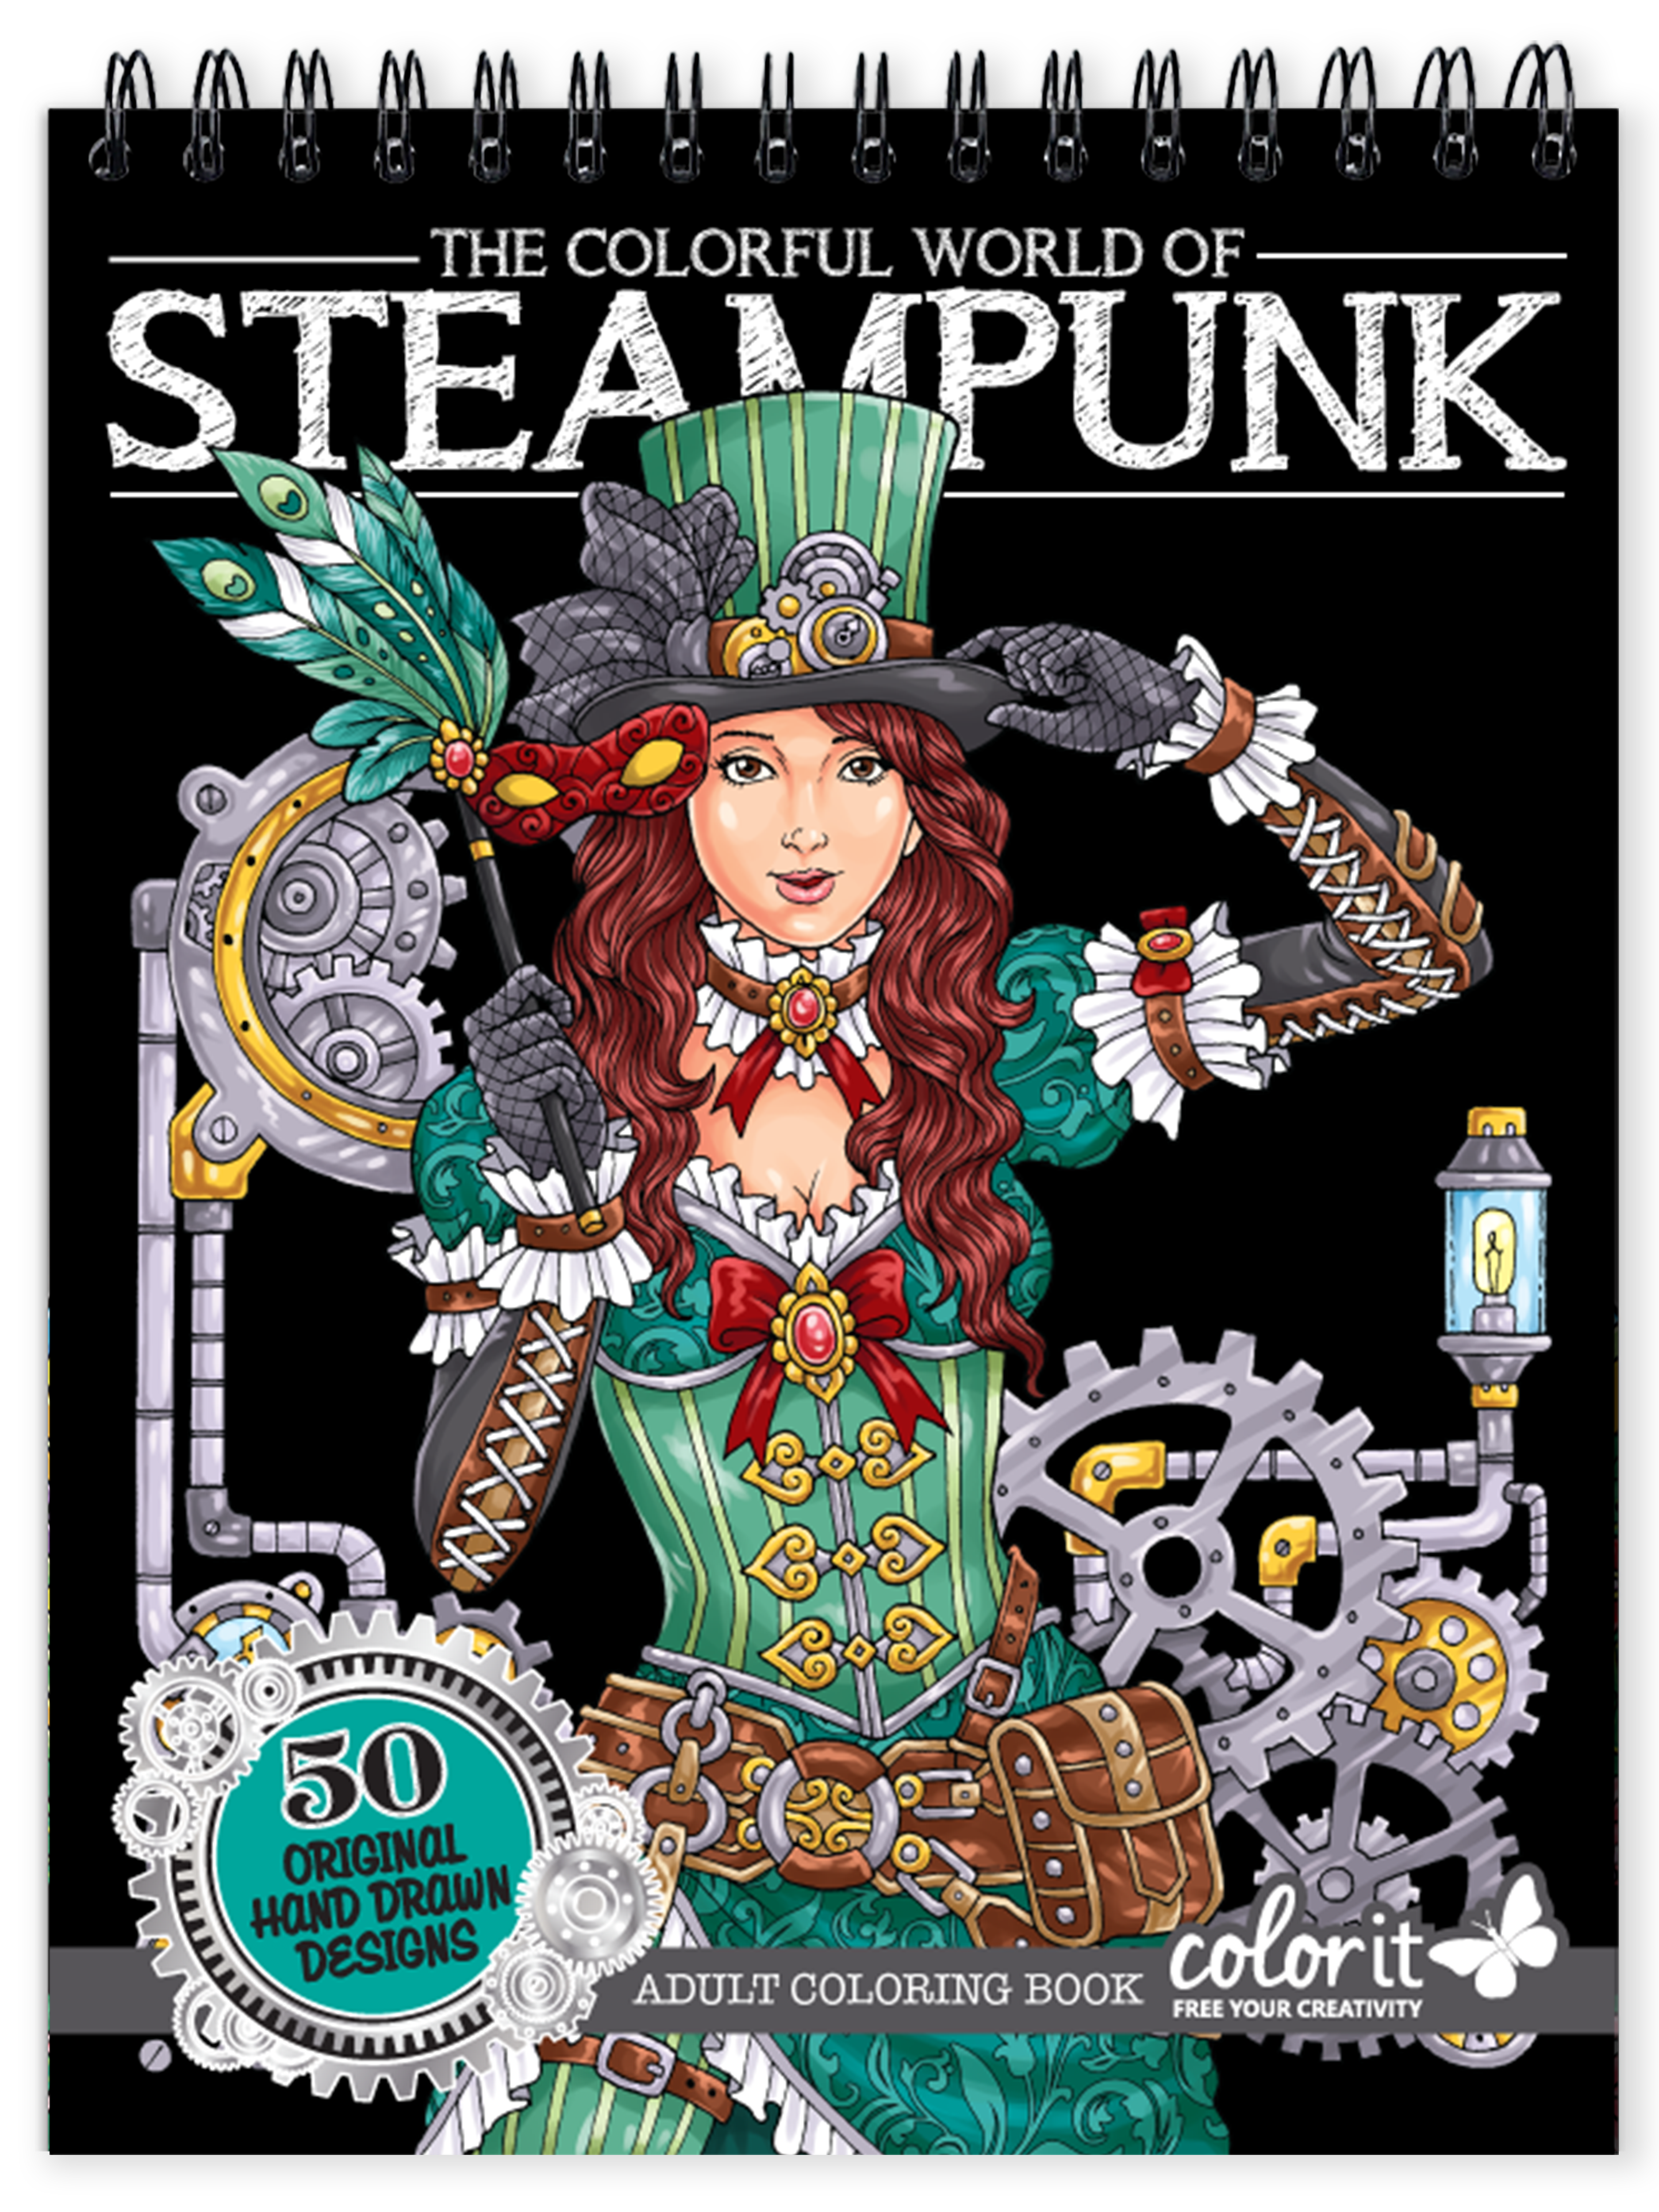 The Colorful World Of Steampunk Coloring Book For Adults With Hardback Covers Spiral Binding Colorit